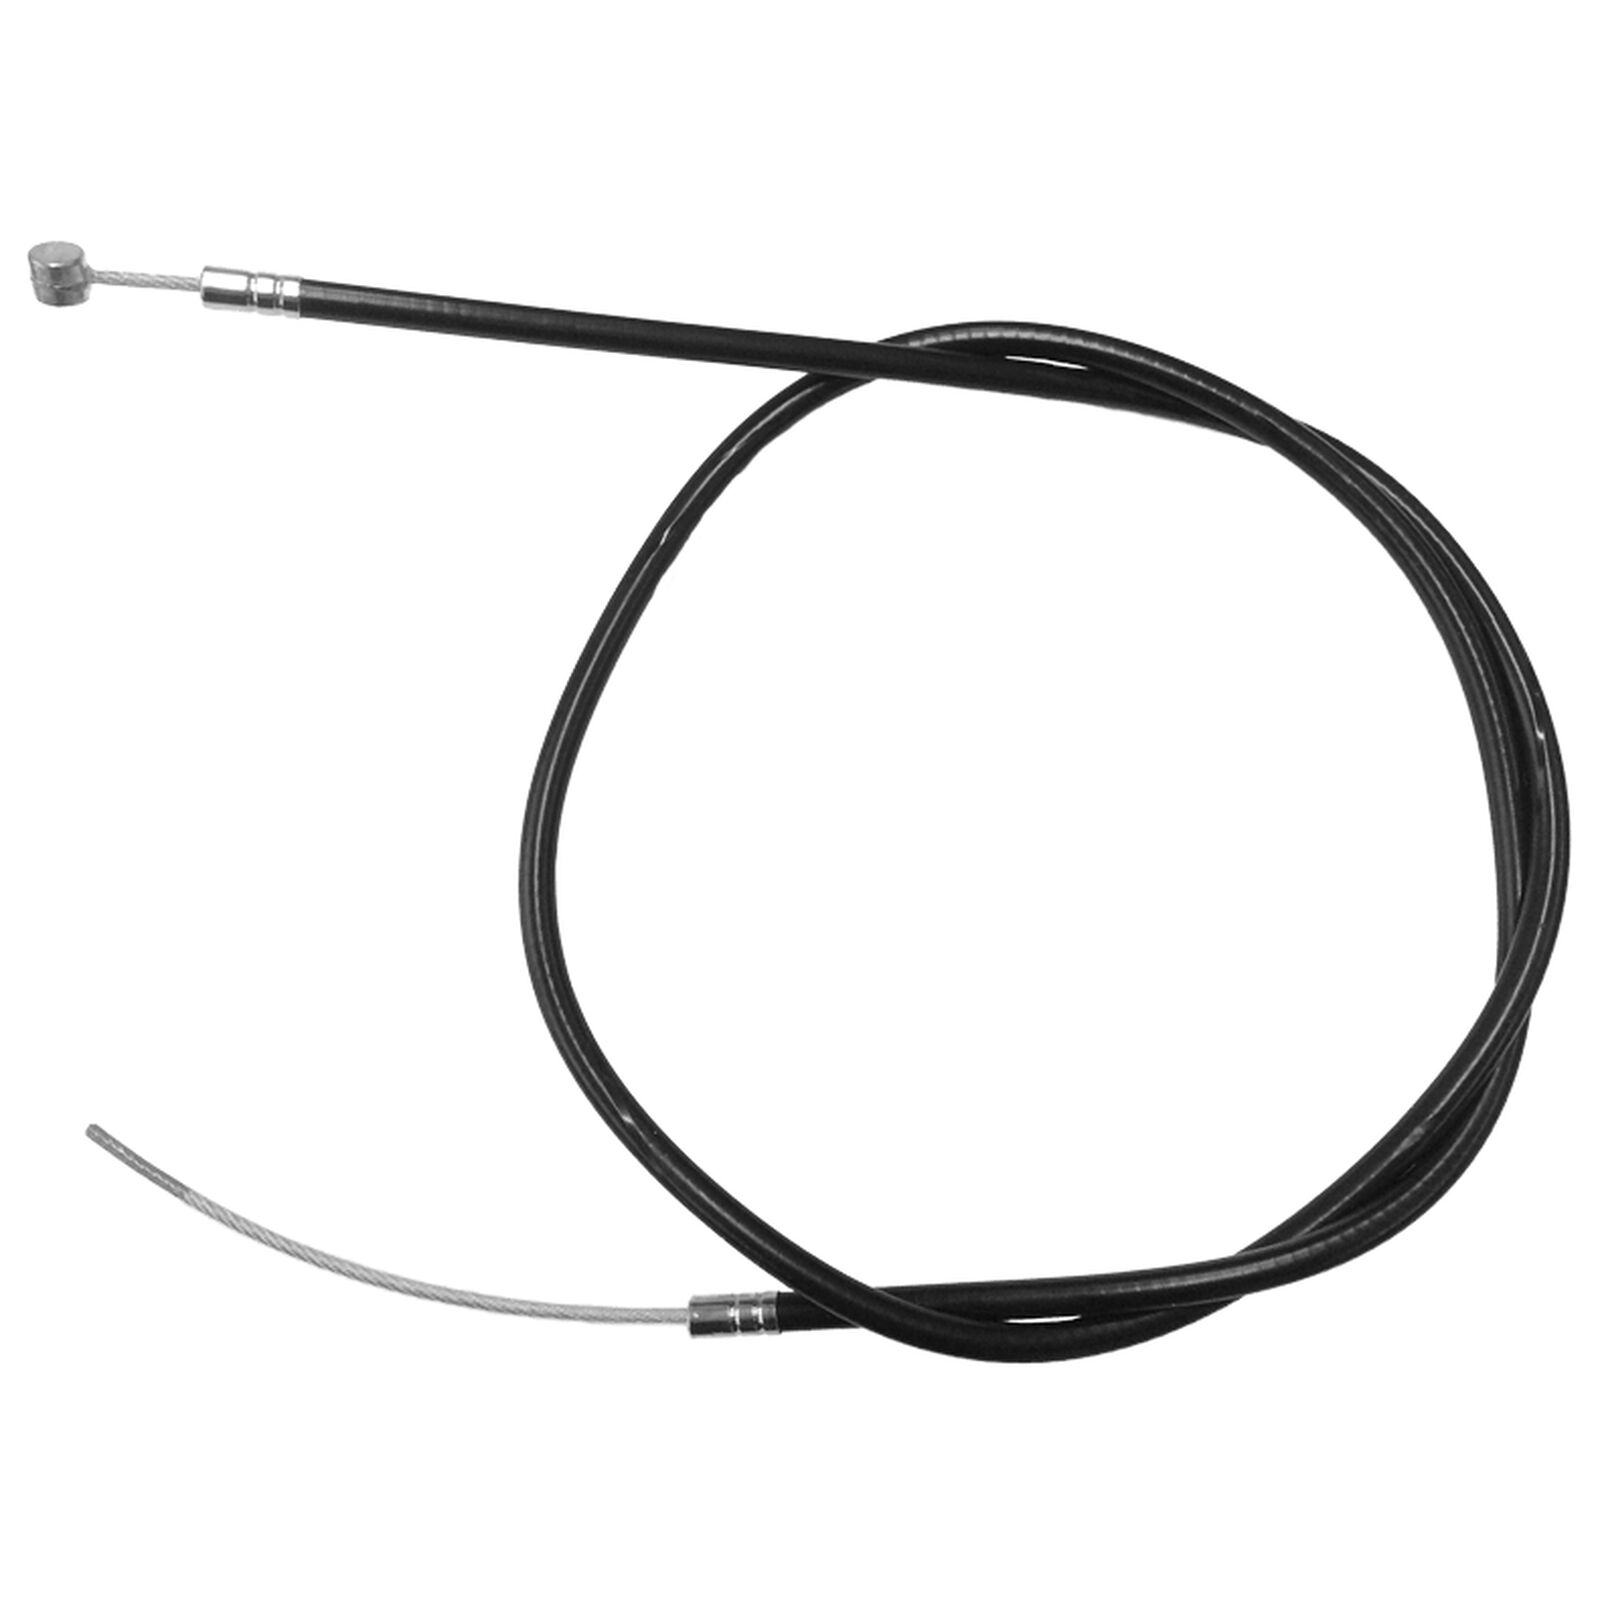 Bugaboo Cameleon brake cable replacement set - View 1